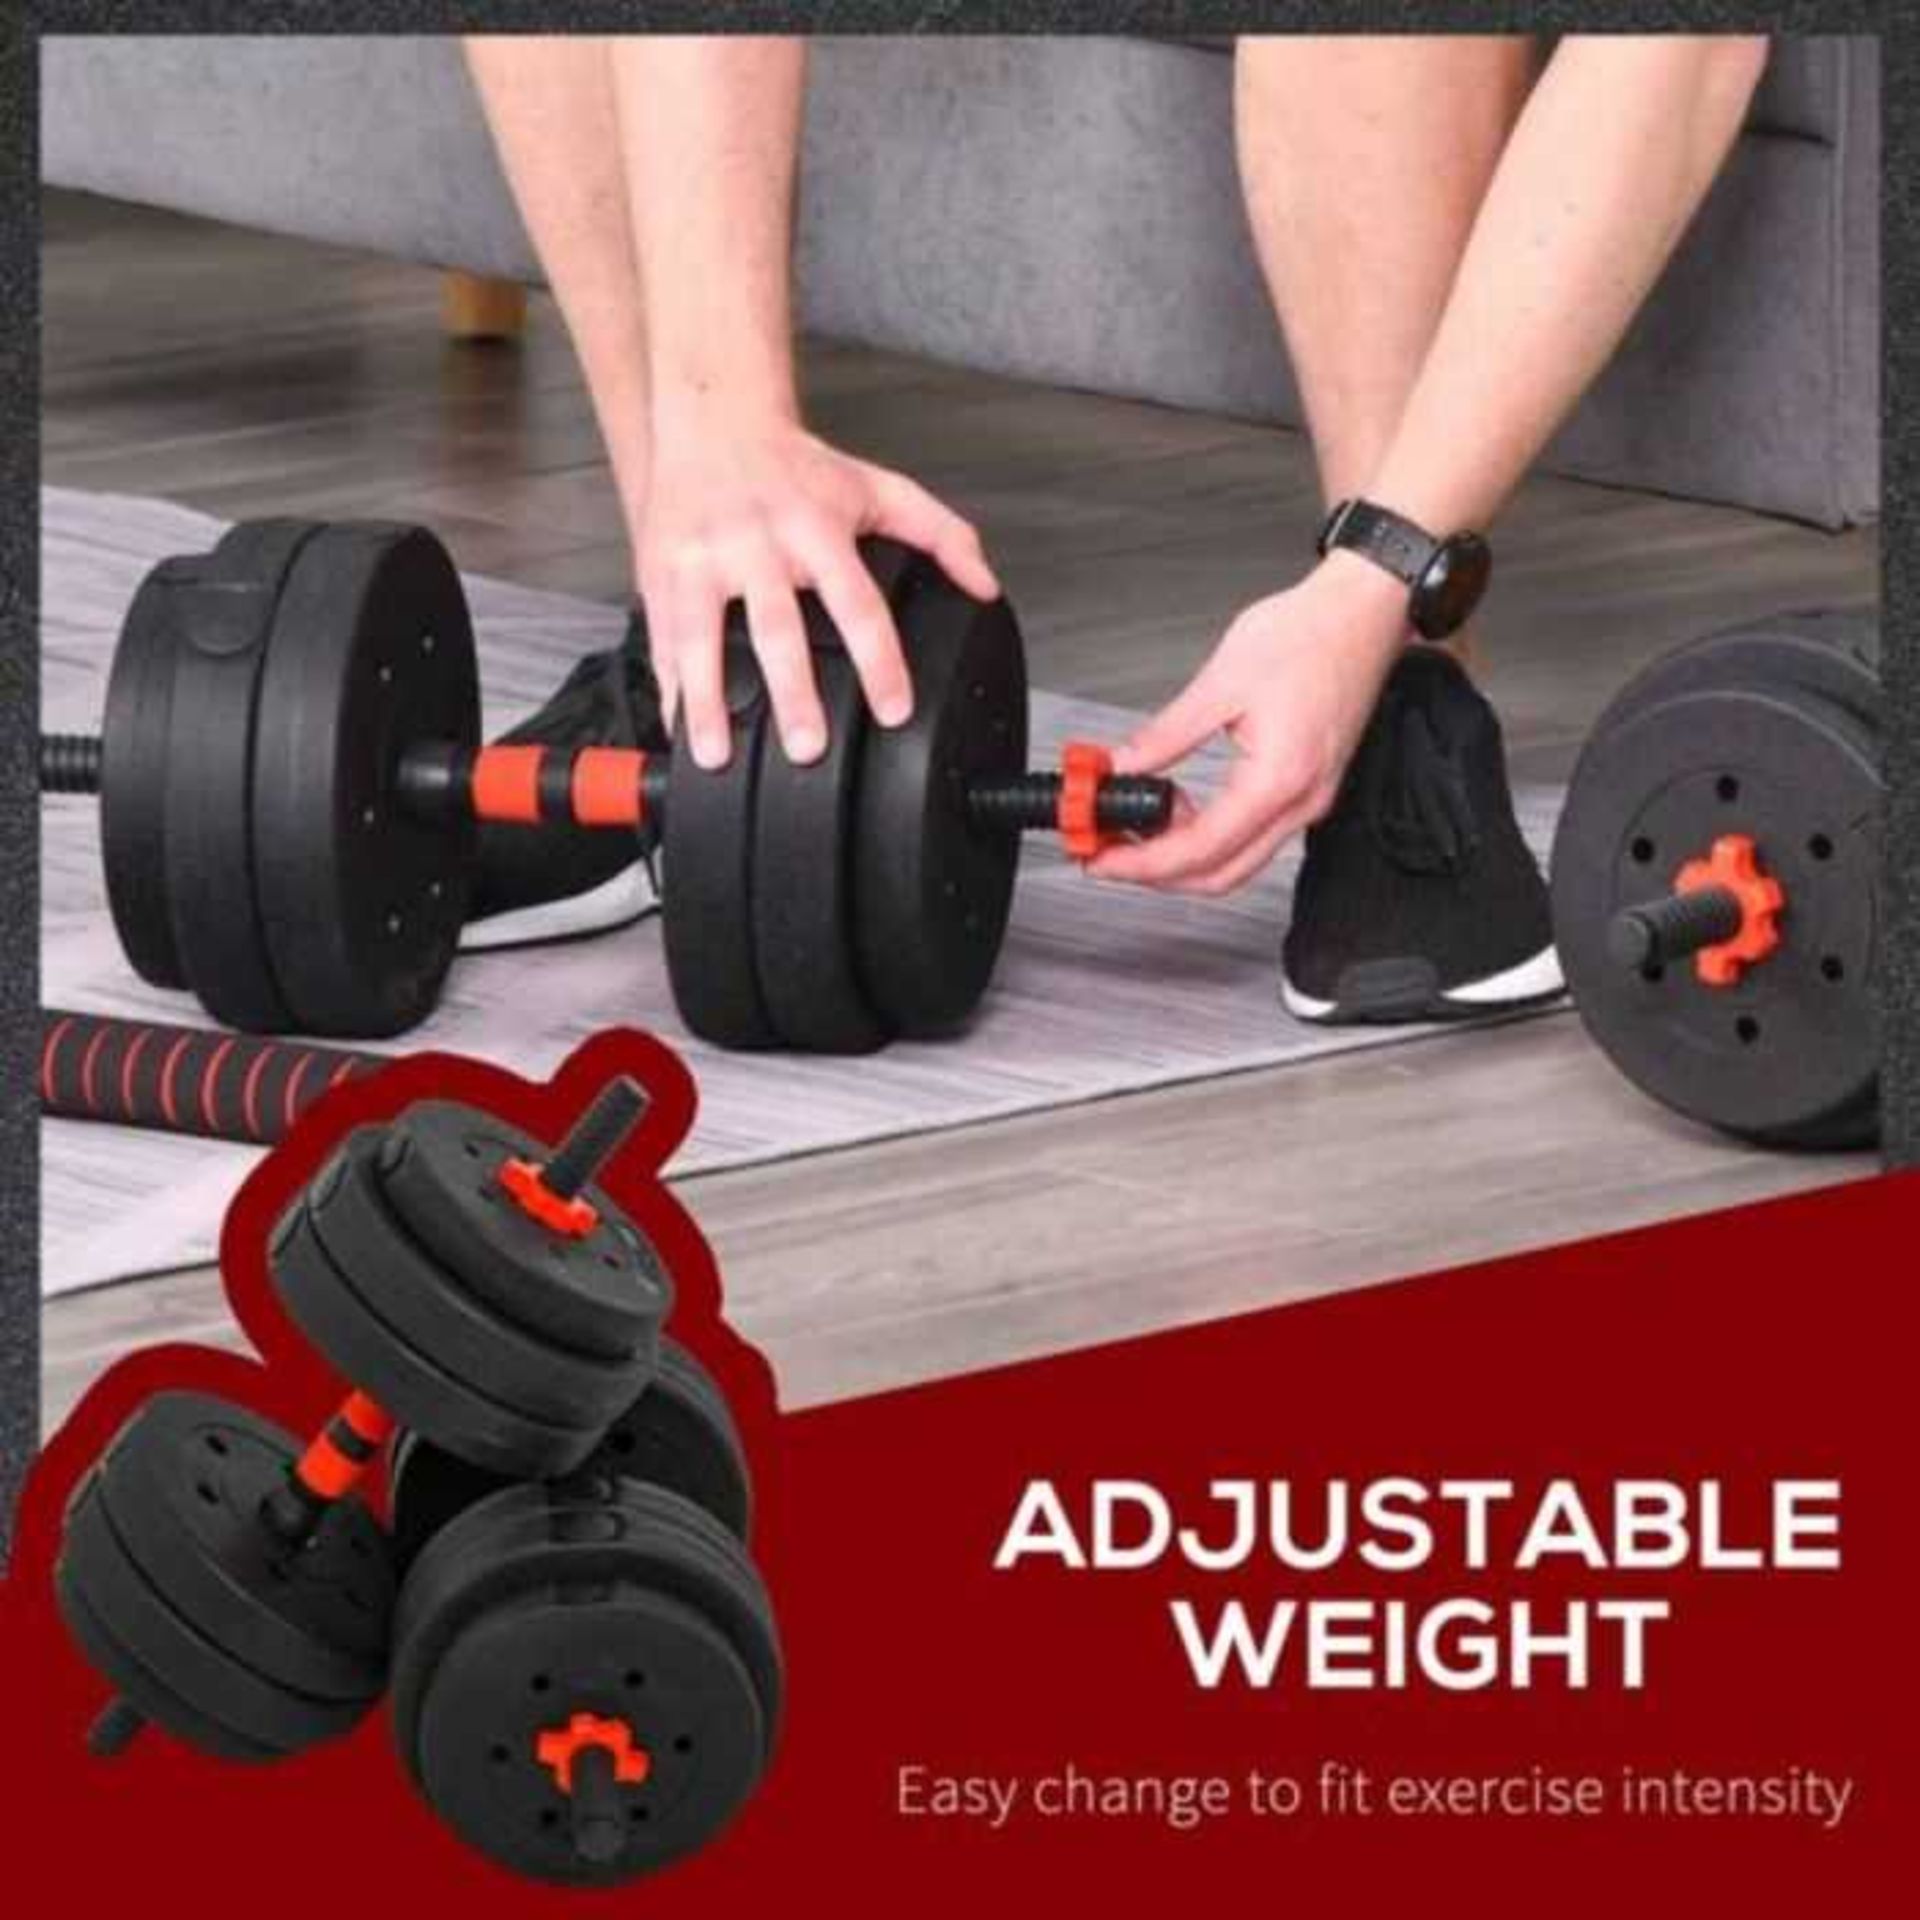 VAT 1x Movtotop 30KG adjustable Dumb Bell weight set, new and boxed, we can only find these in - Image 2 of 4